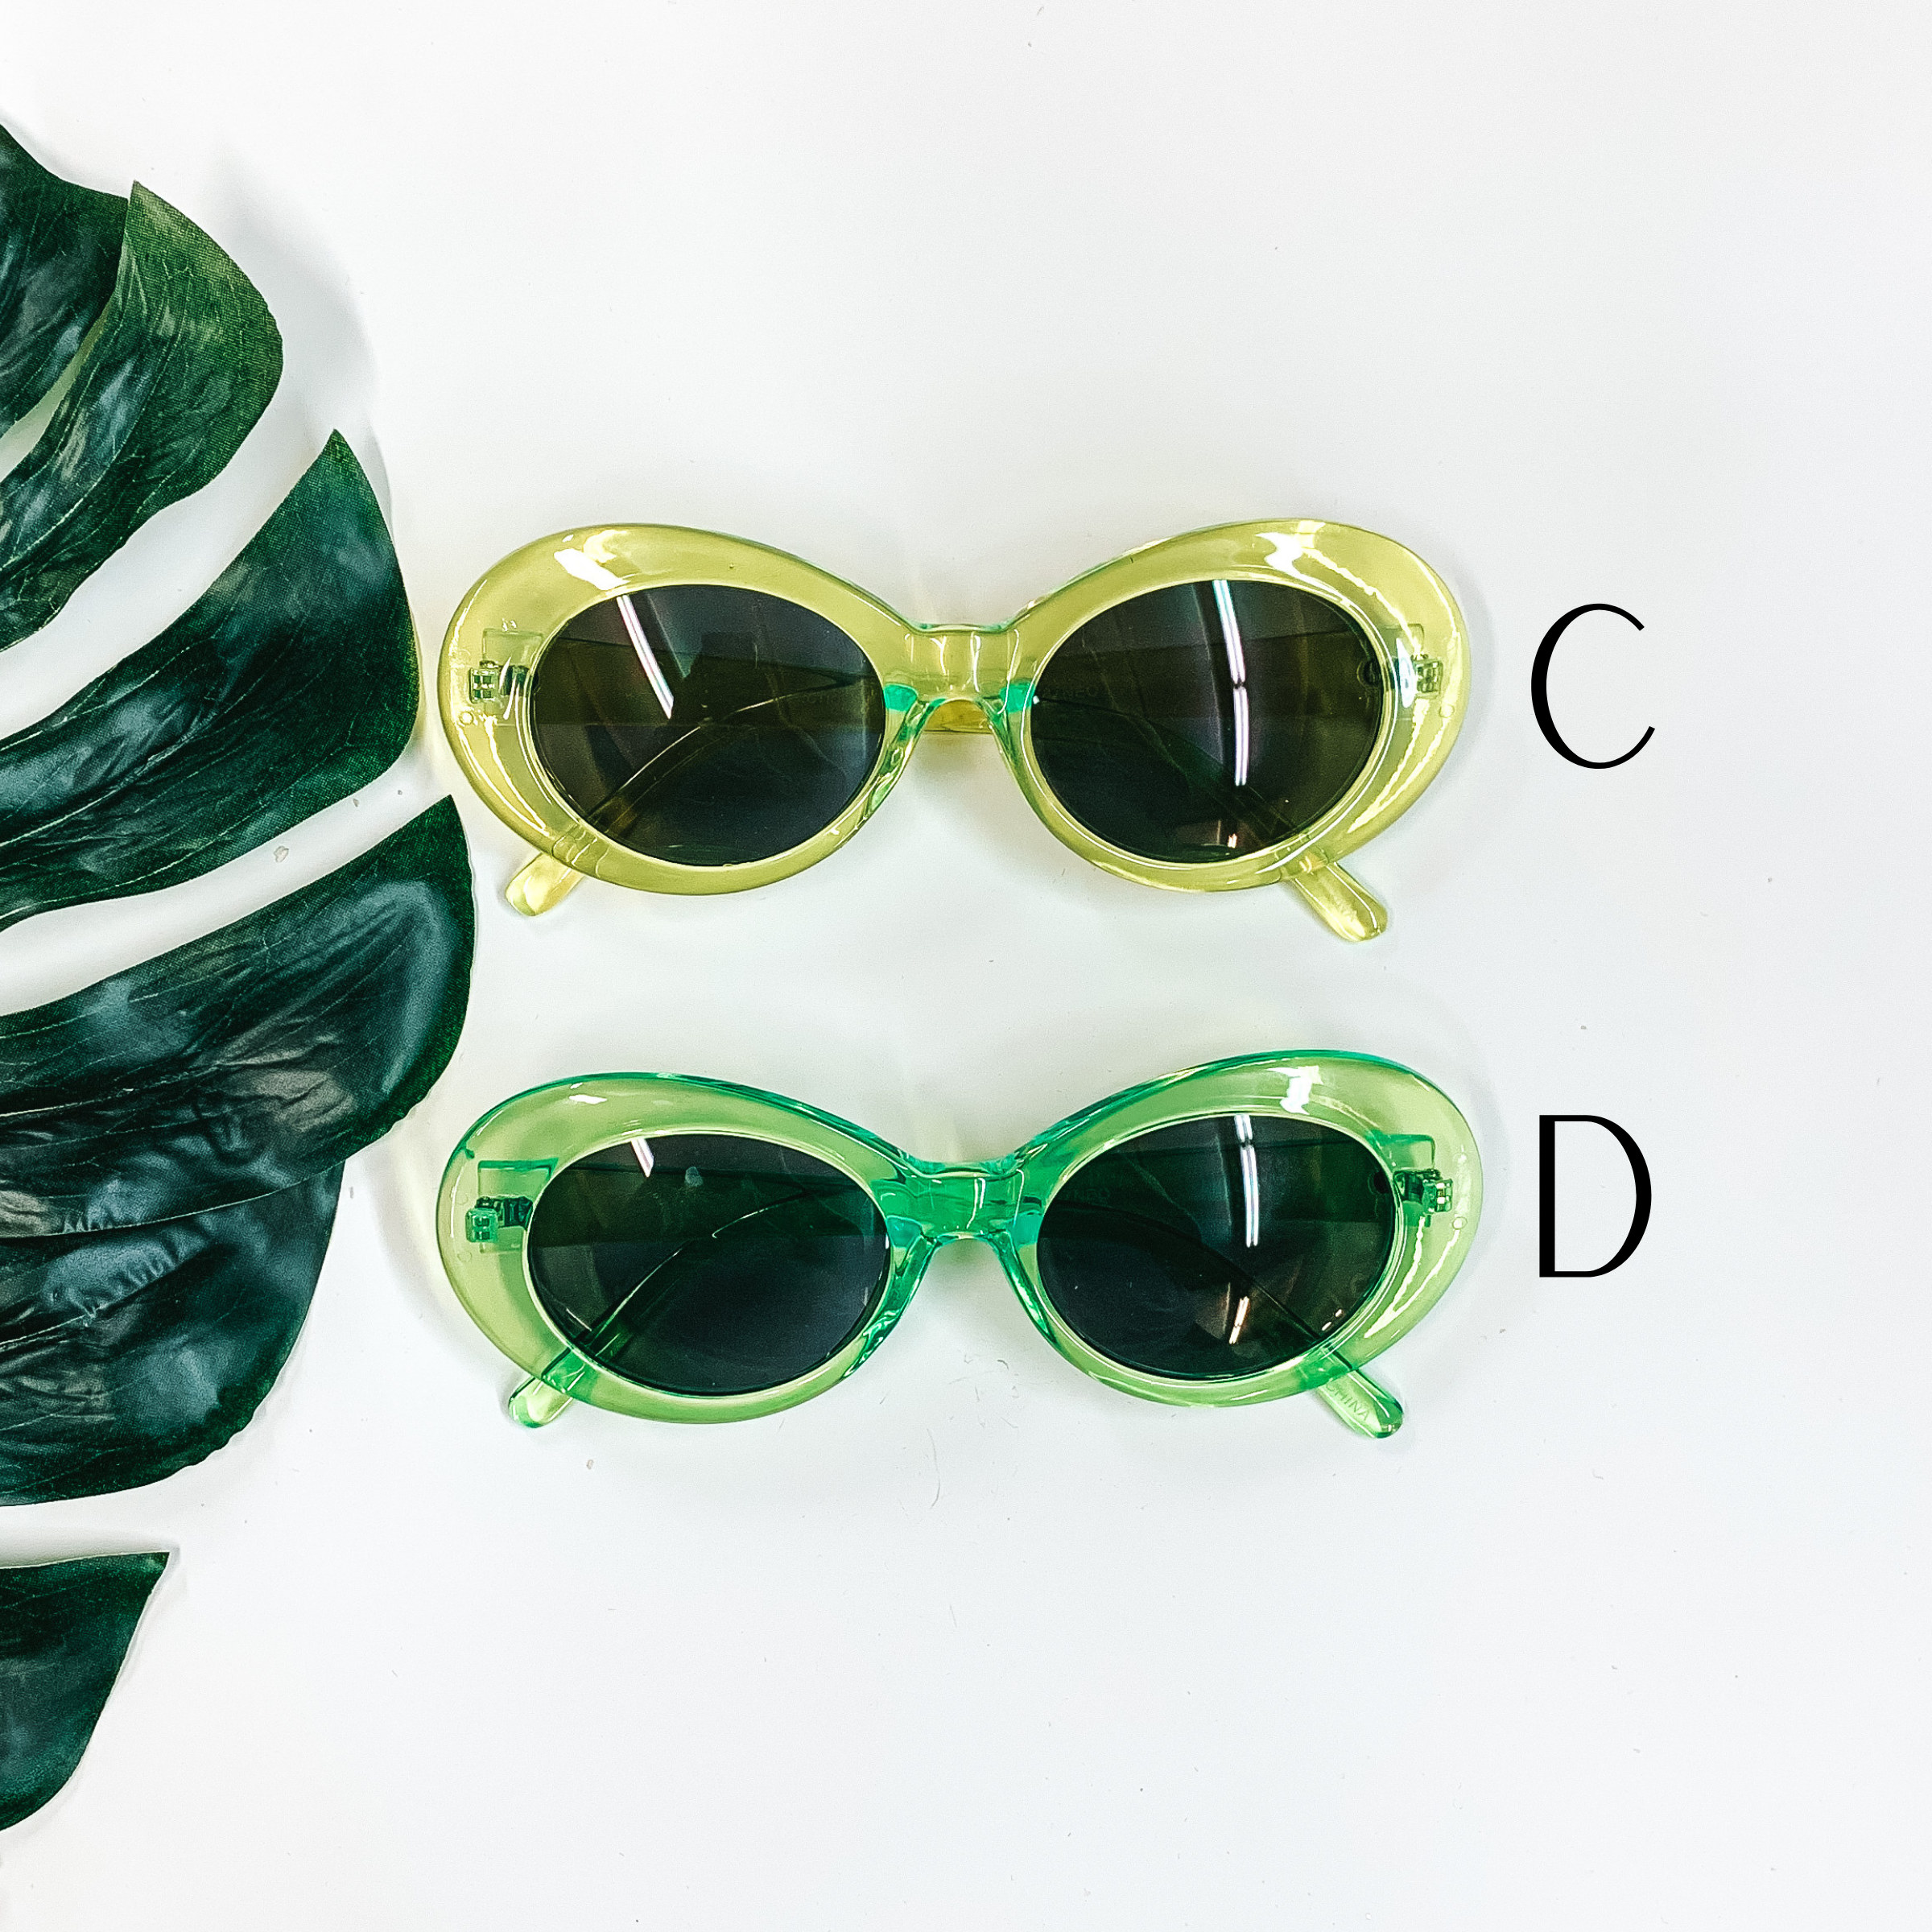 Groovy Neon Sunglasses in Various Colors - Giddy Up Glamour Boutique